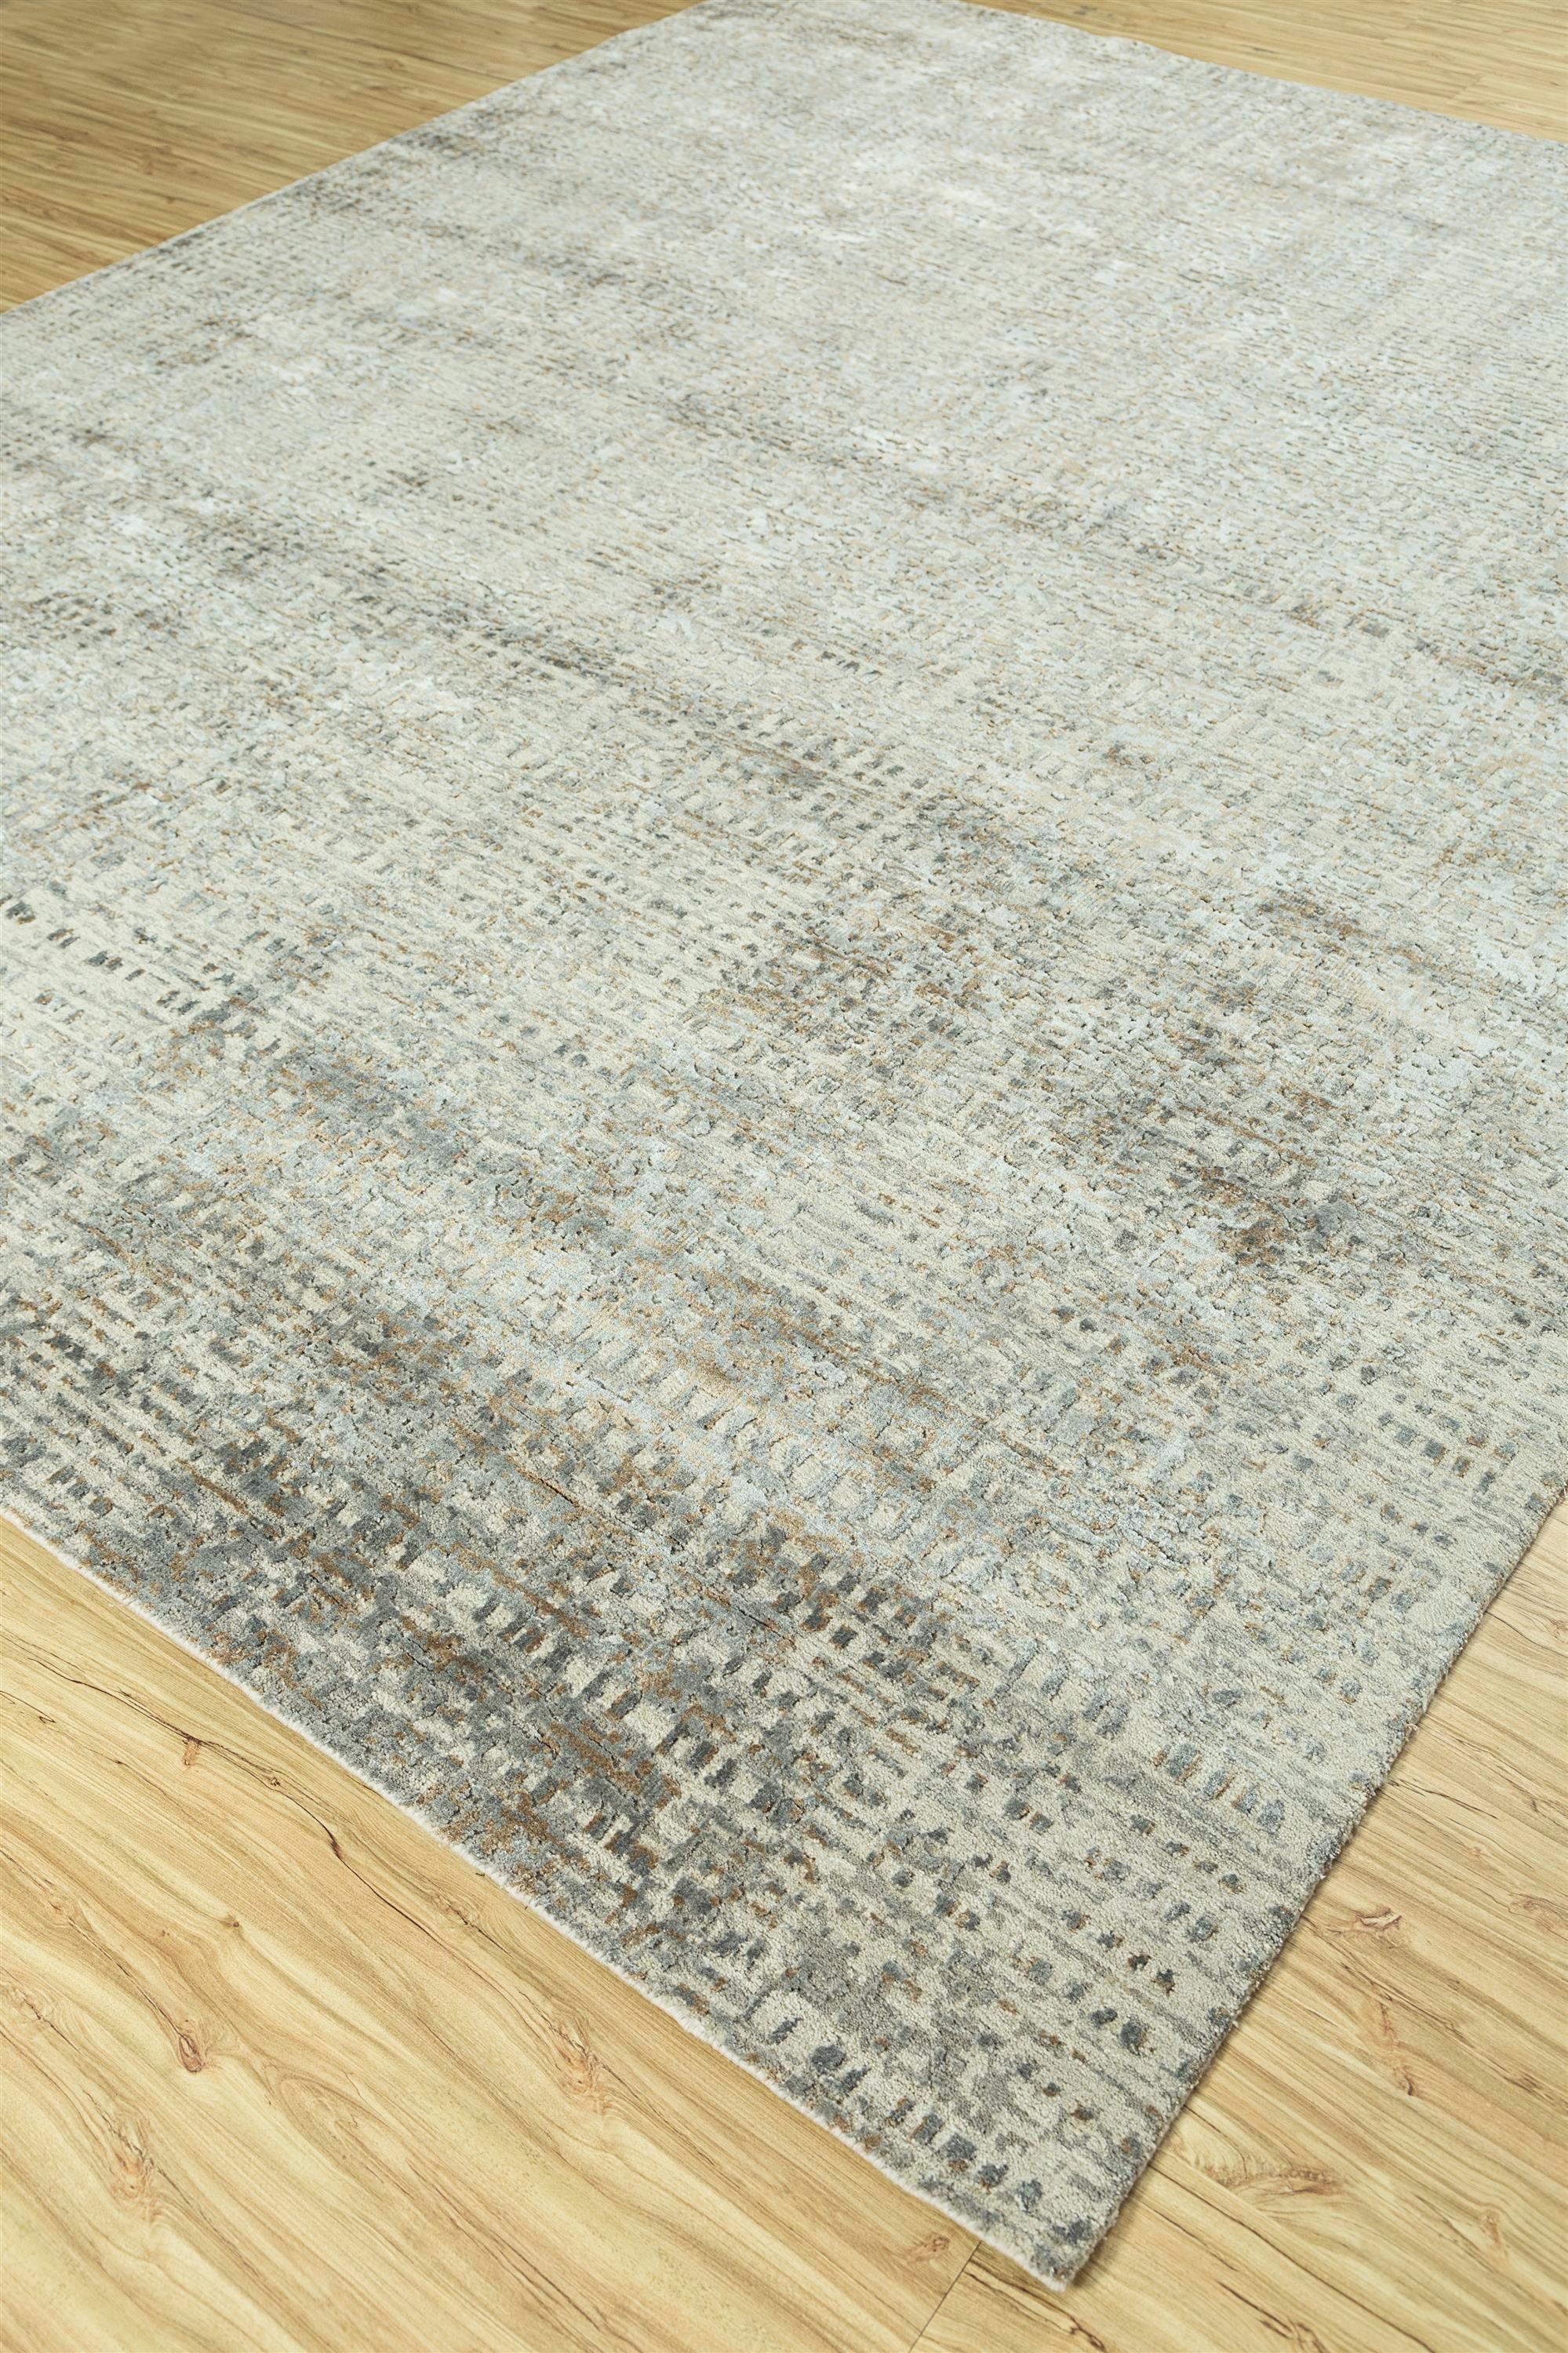 Step into modern elegance with our hand-knotted rug, harmonizing soft gray and antique white in a contemporary masterpiece. It blends mesh textures and creates a serene atmosphere. This rug transforms floors into artistic focal points, perfect for